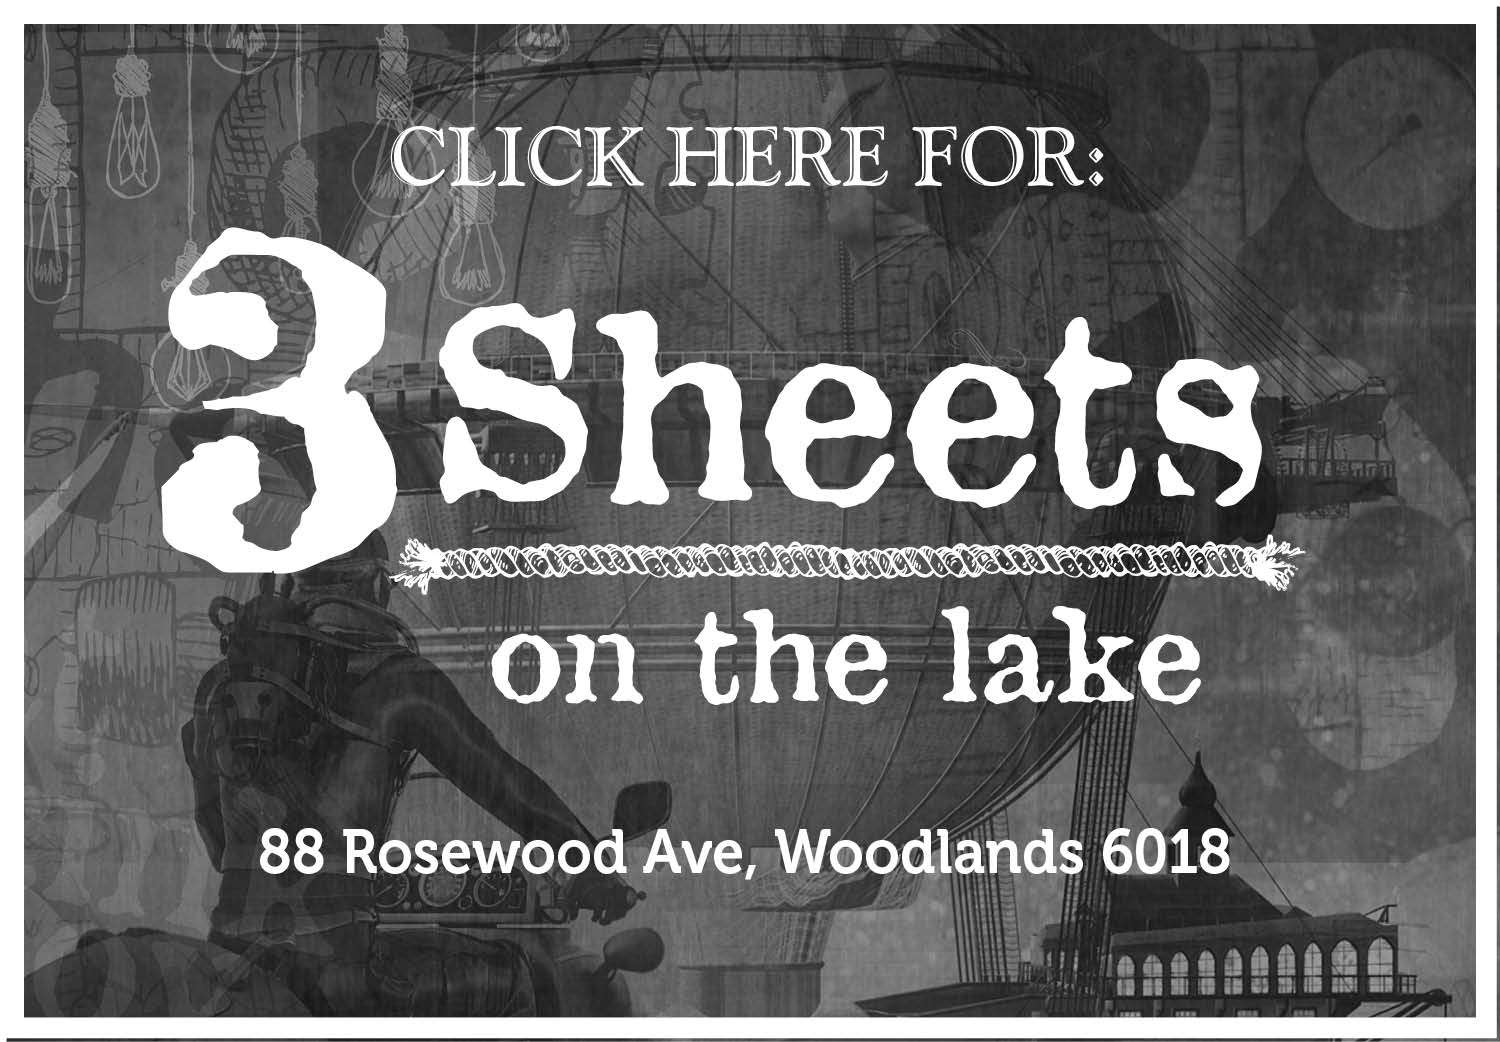 3Sheets on the Lake